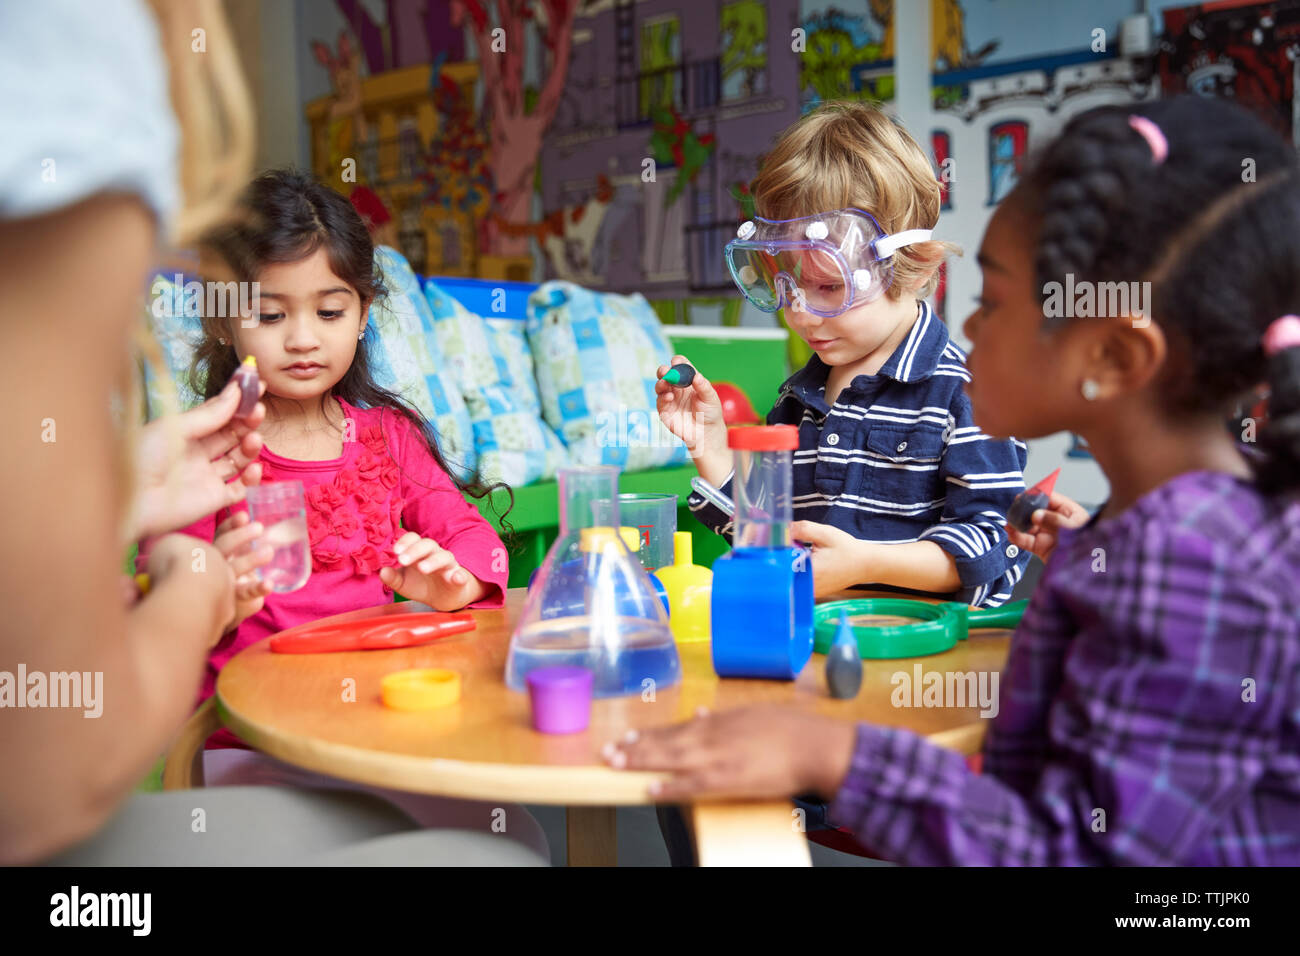 Children doing science experiment at table in preschool Stock Photo